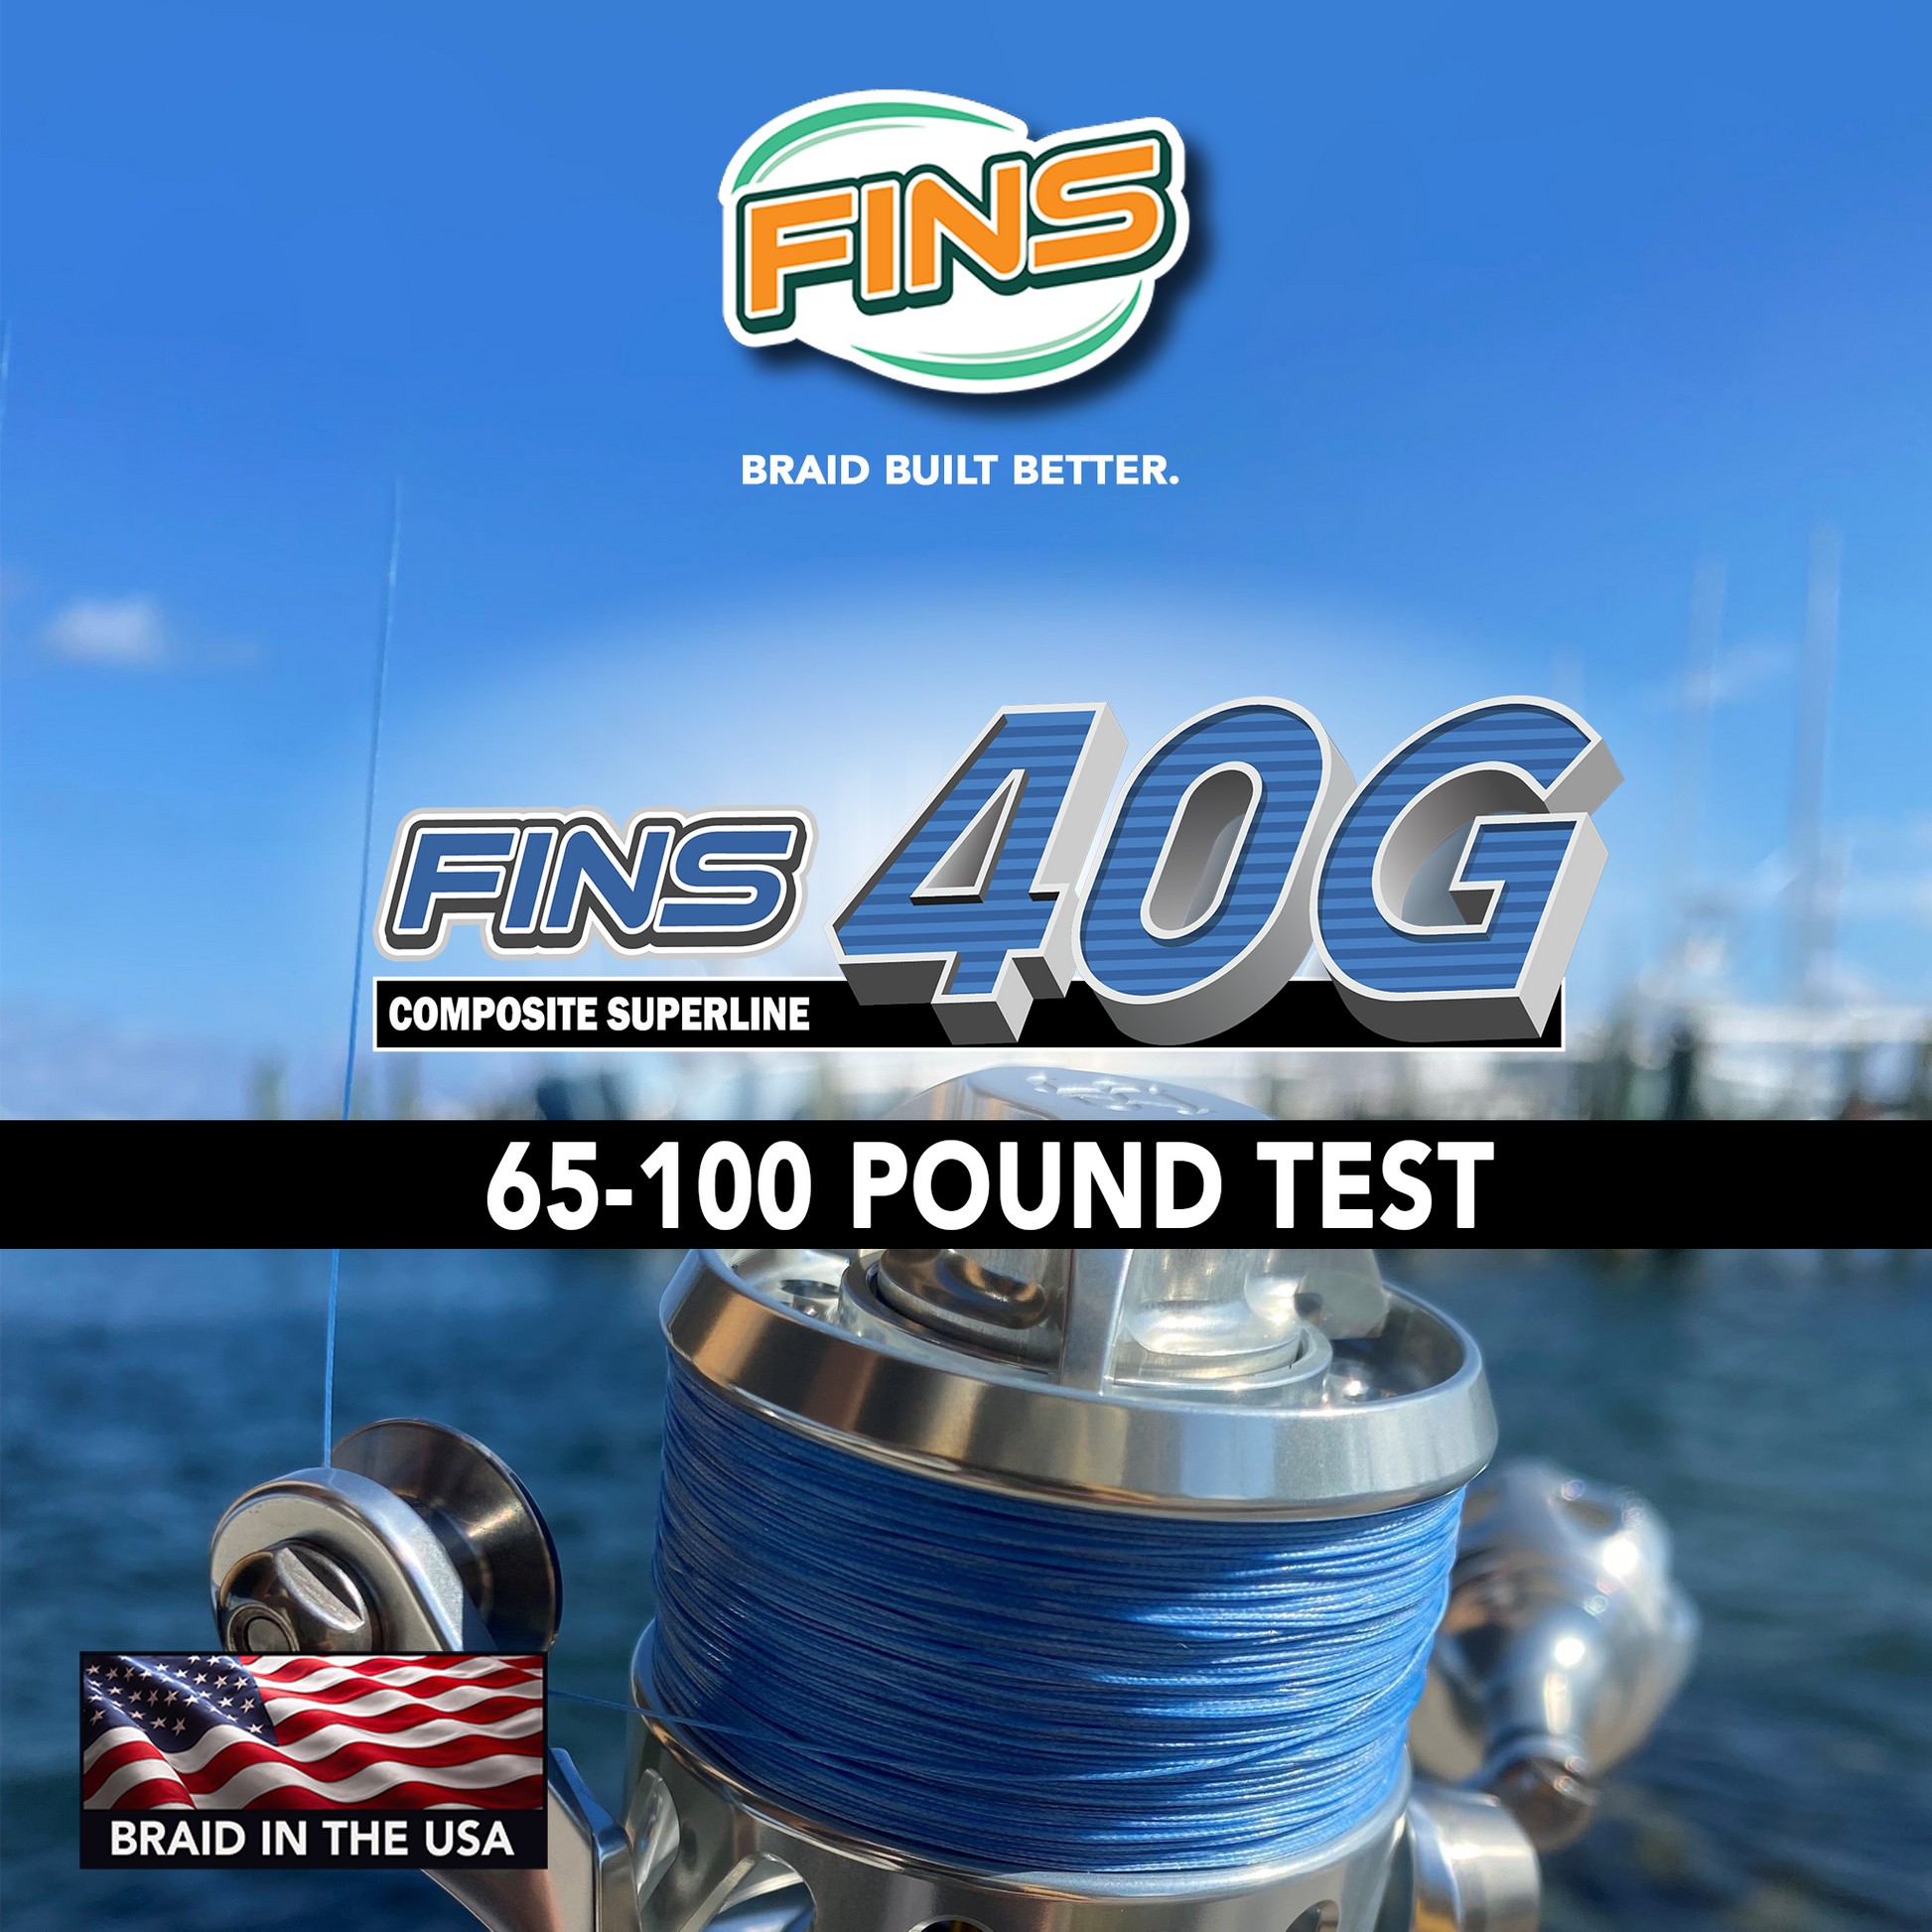 Fins Braided Line Review Clearance Online